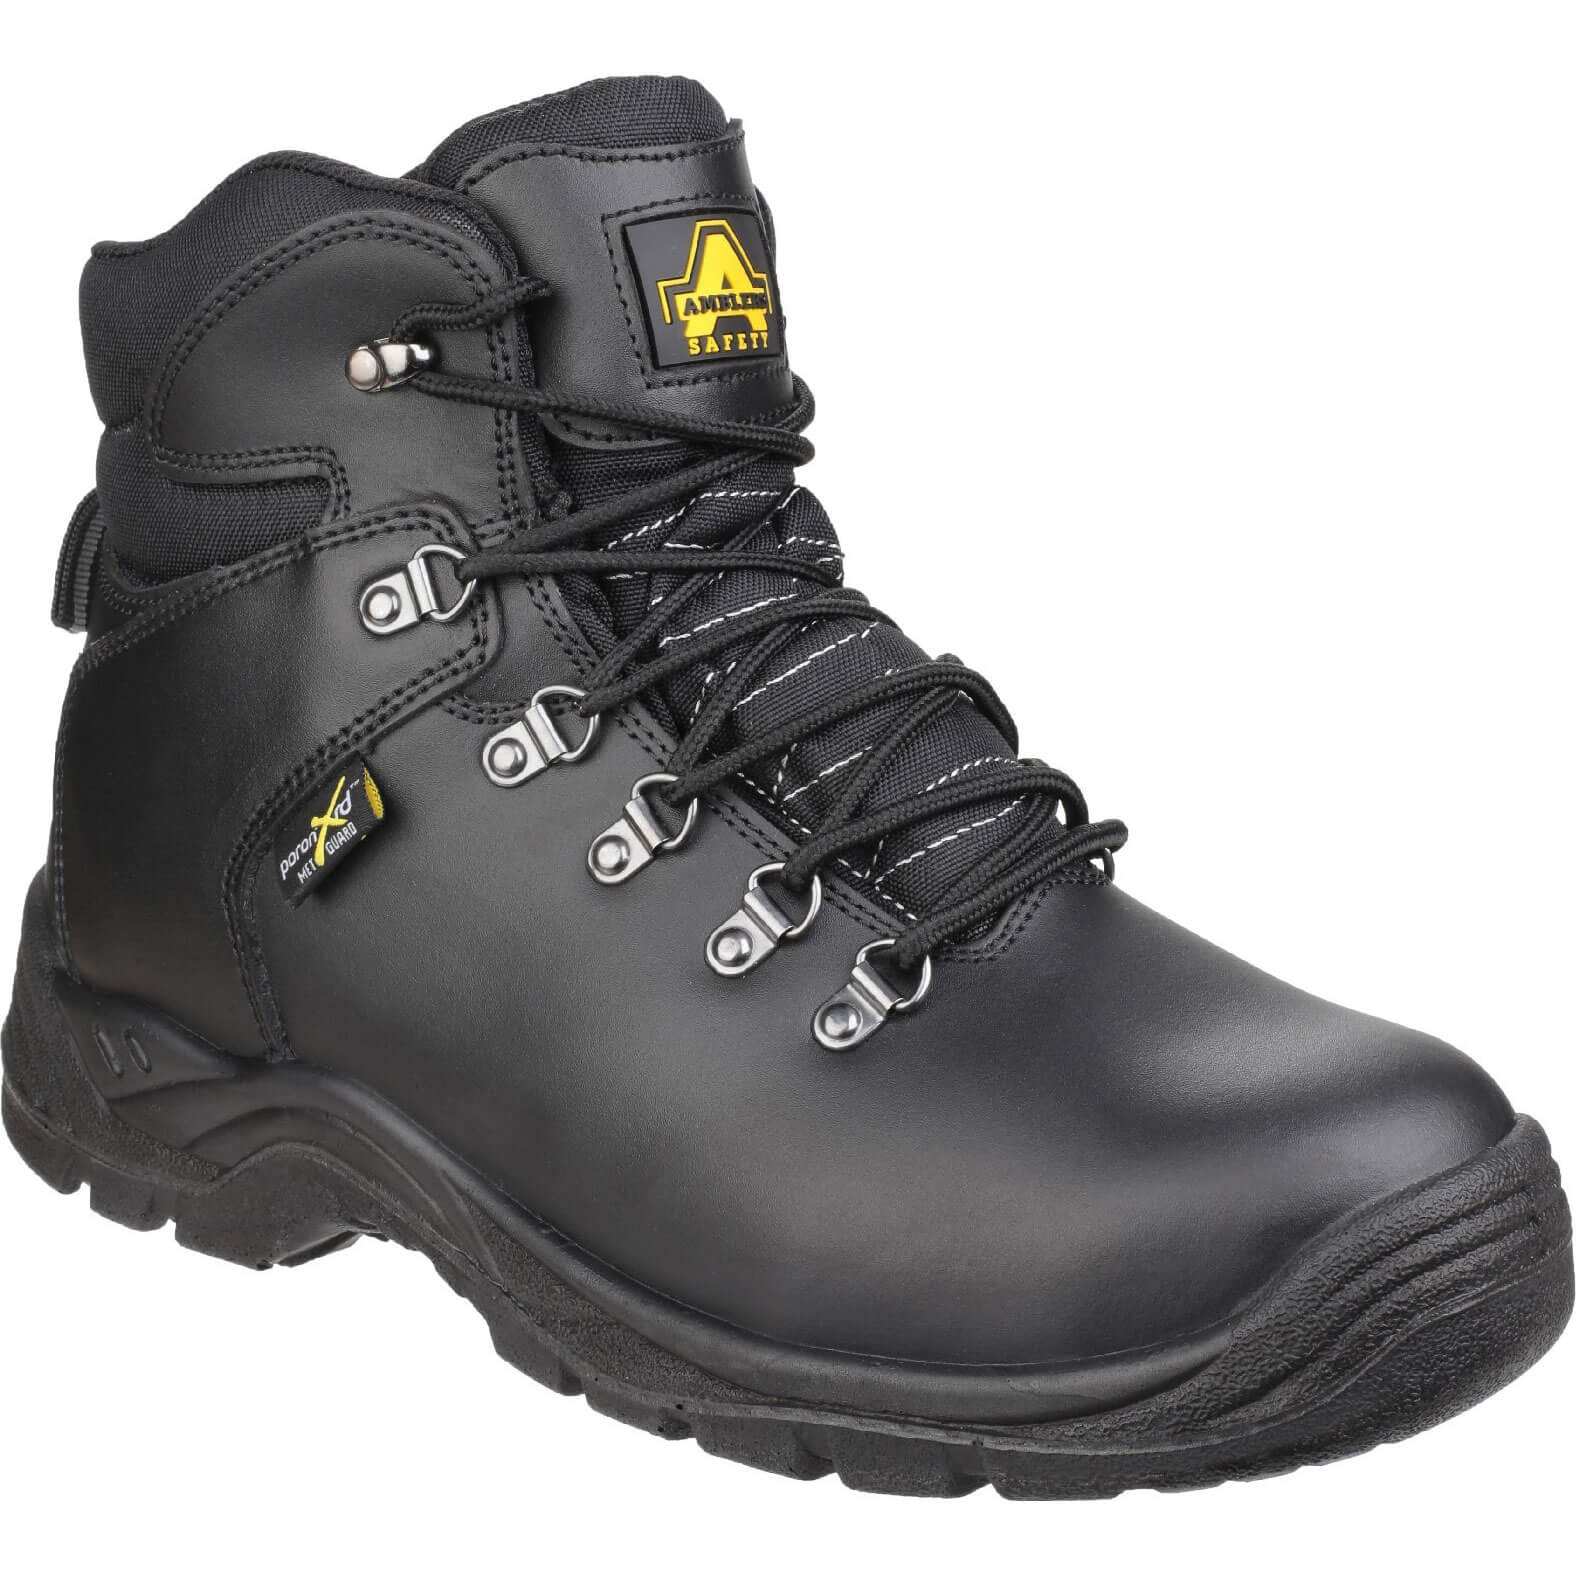 Image of Amblers Mens Safety As335 Poron Xrd Internal Metatarsal Safety Boots Black Size 10